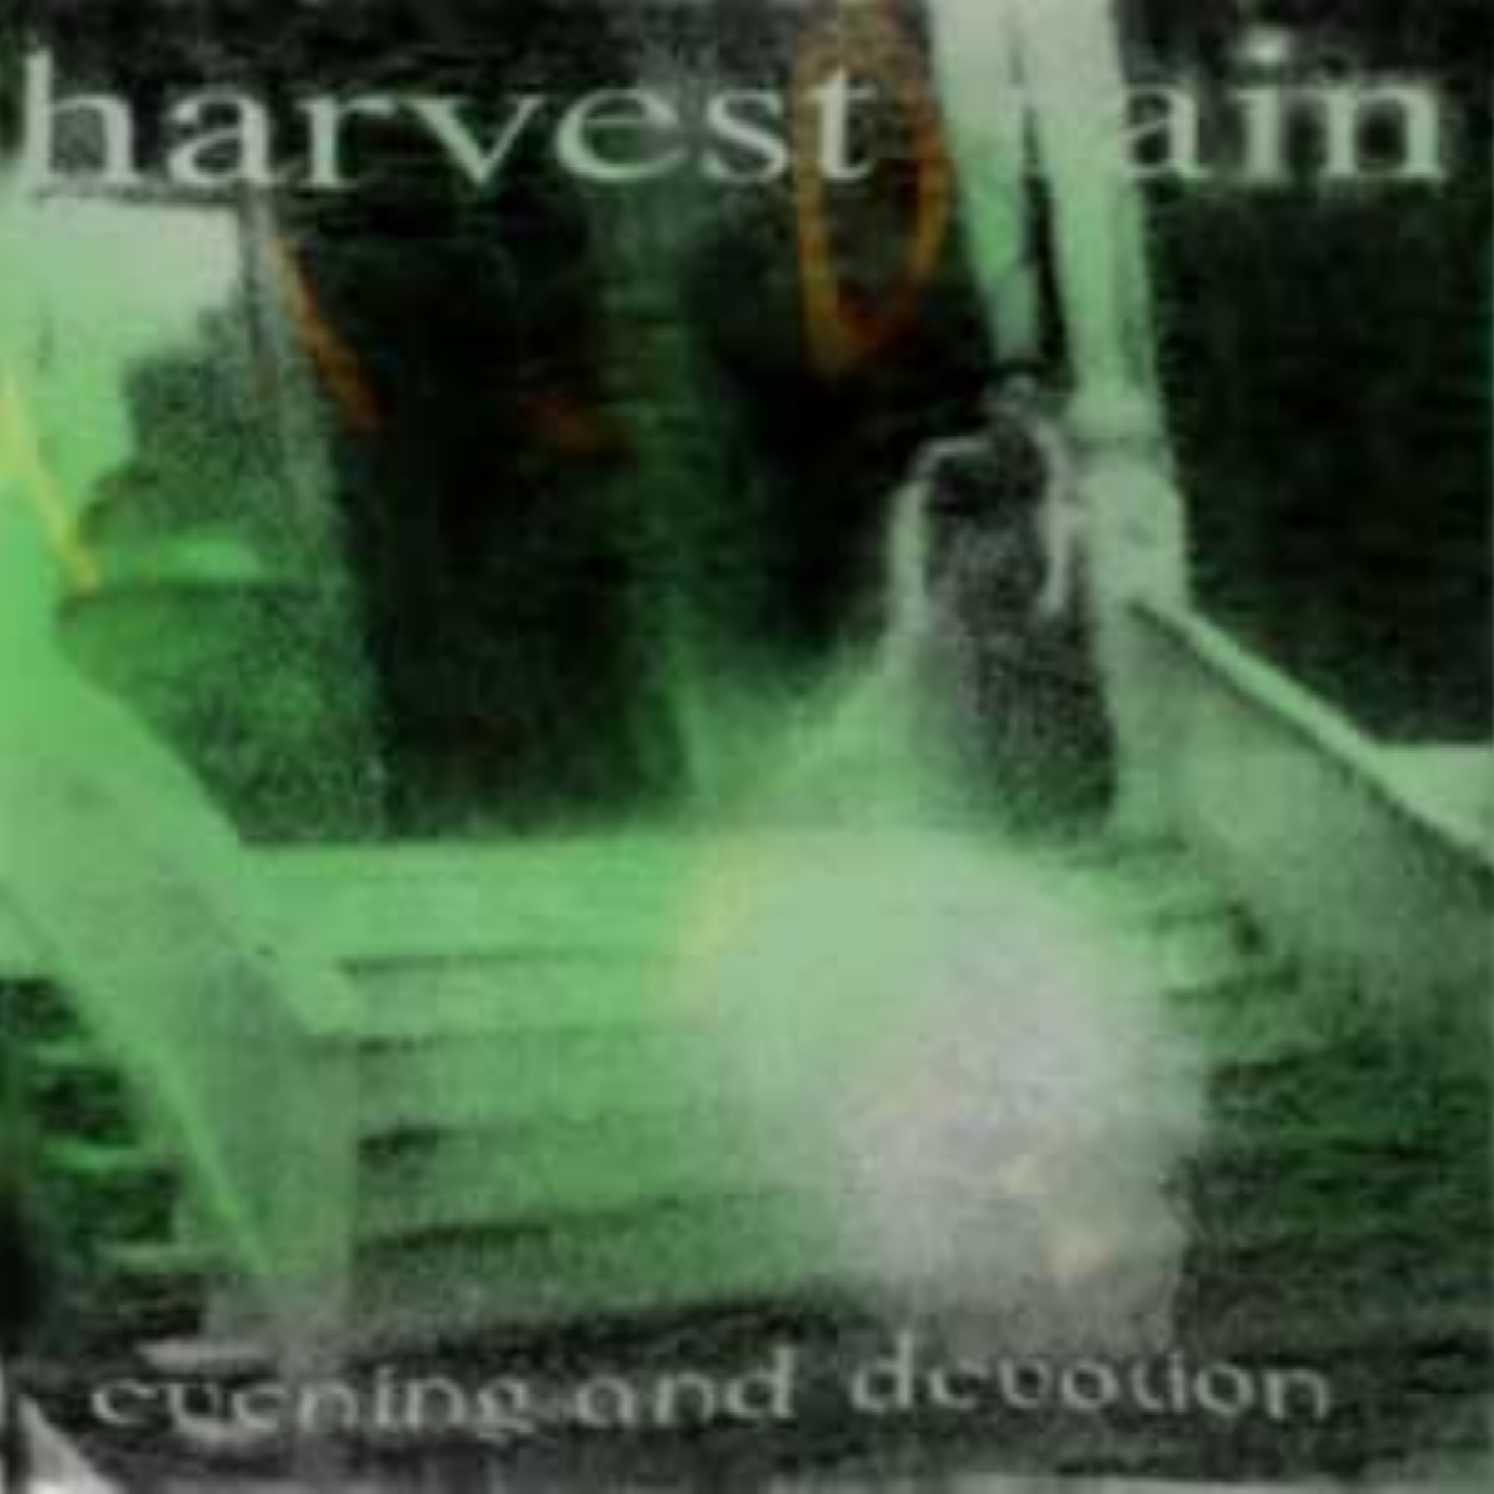 Evening and Devotion (the Album) 1997